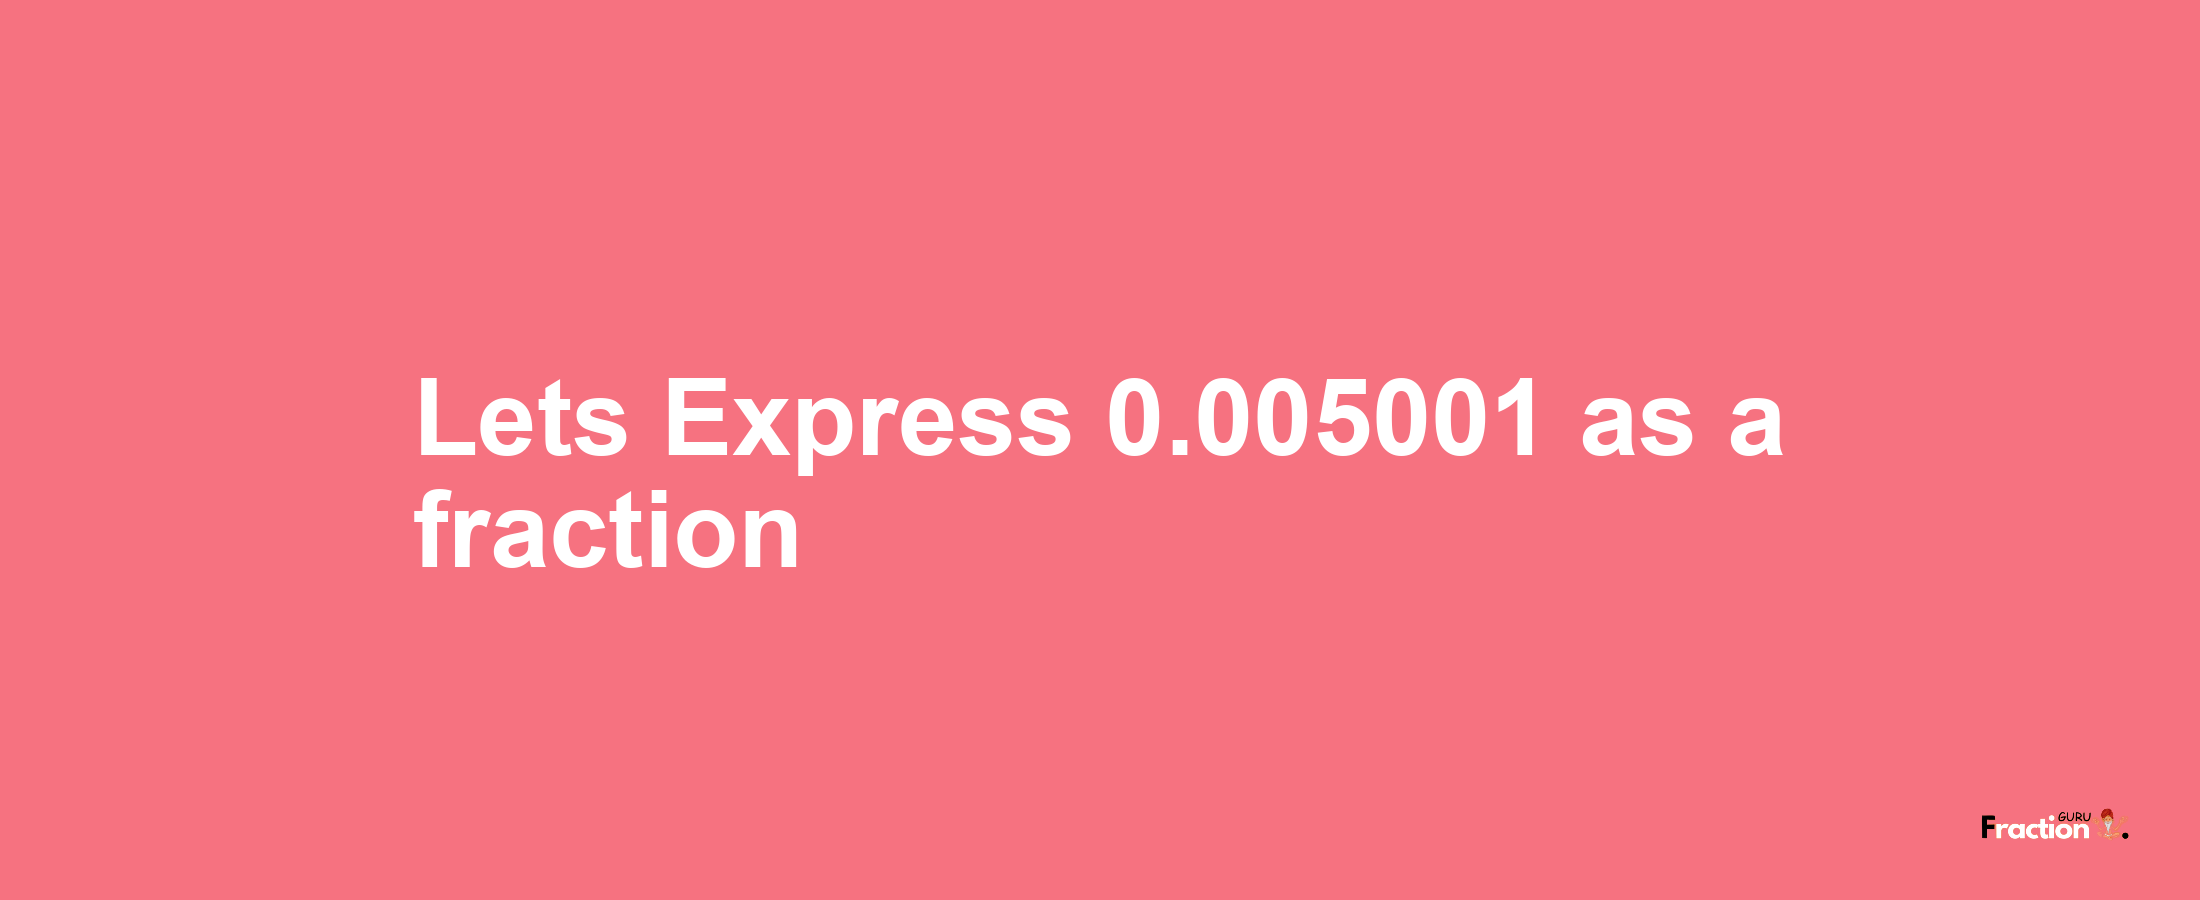 Lets Express 0.005001 as afraction